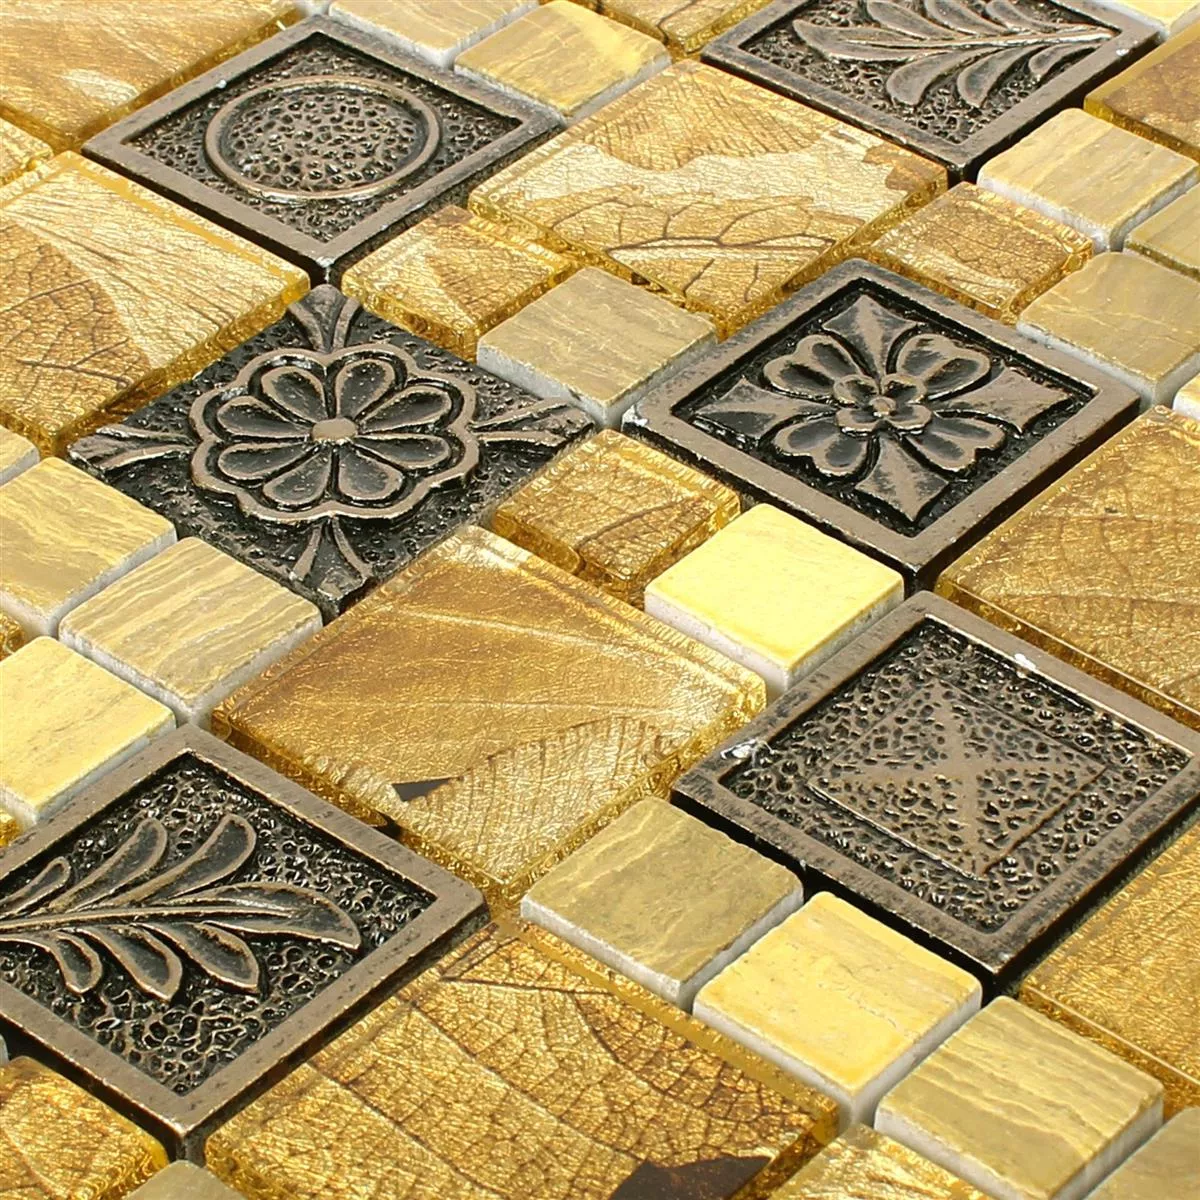 Sample Mosaic Tiles Levanzo Glass Resin Ornament Mix Gold